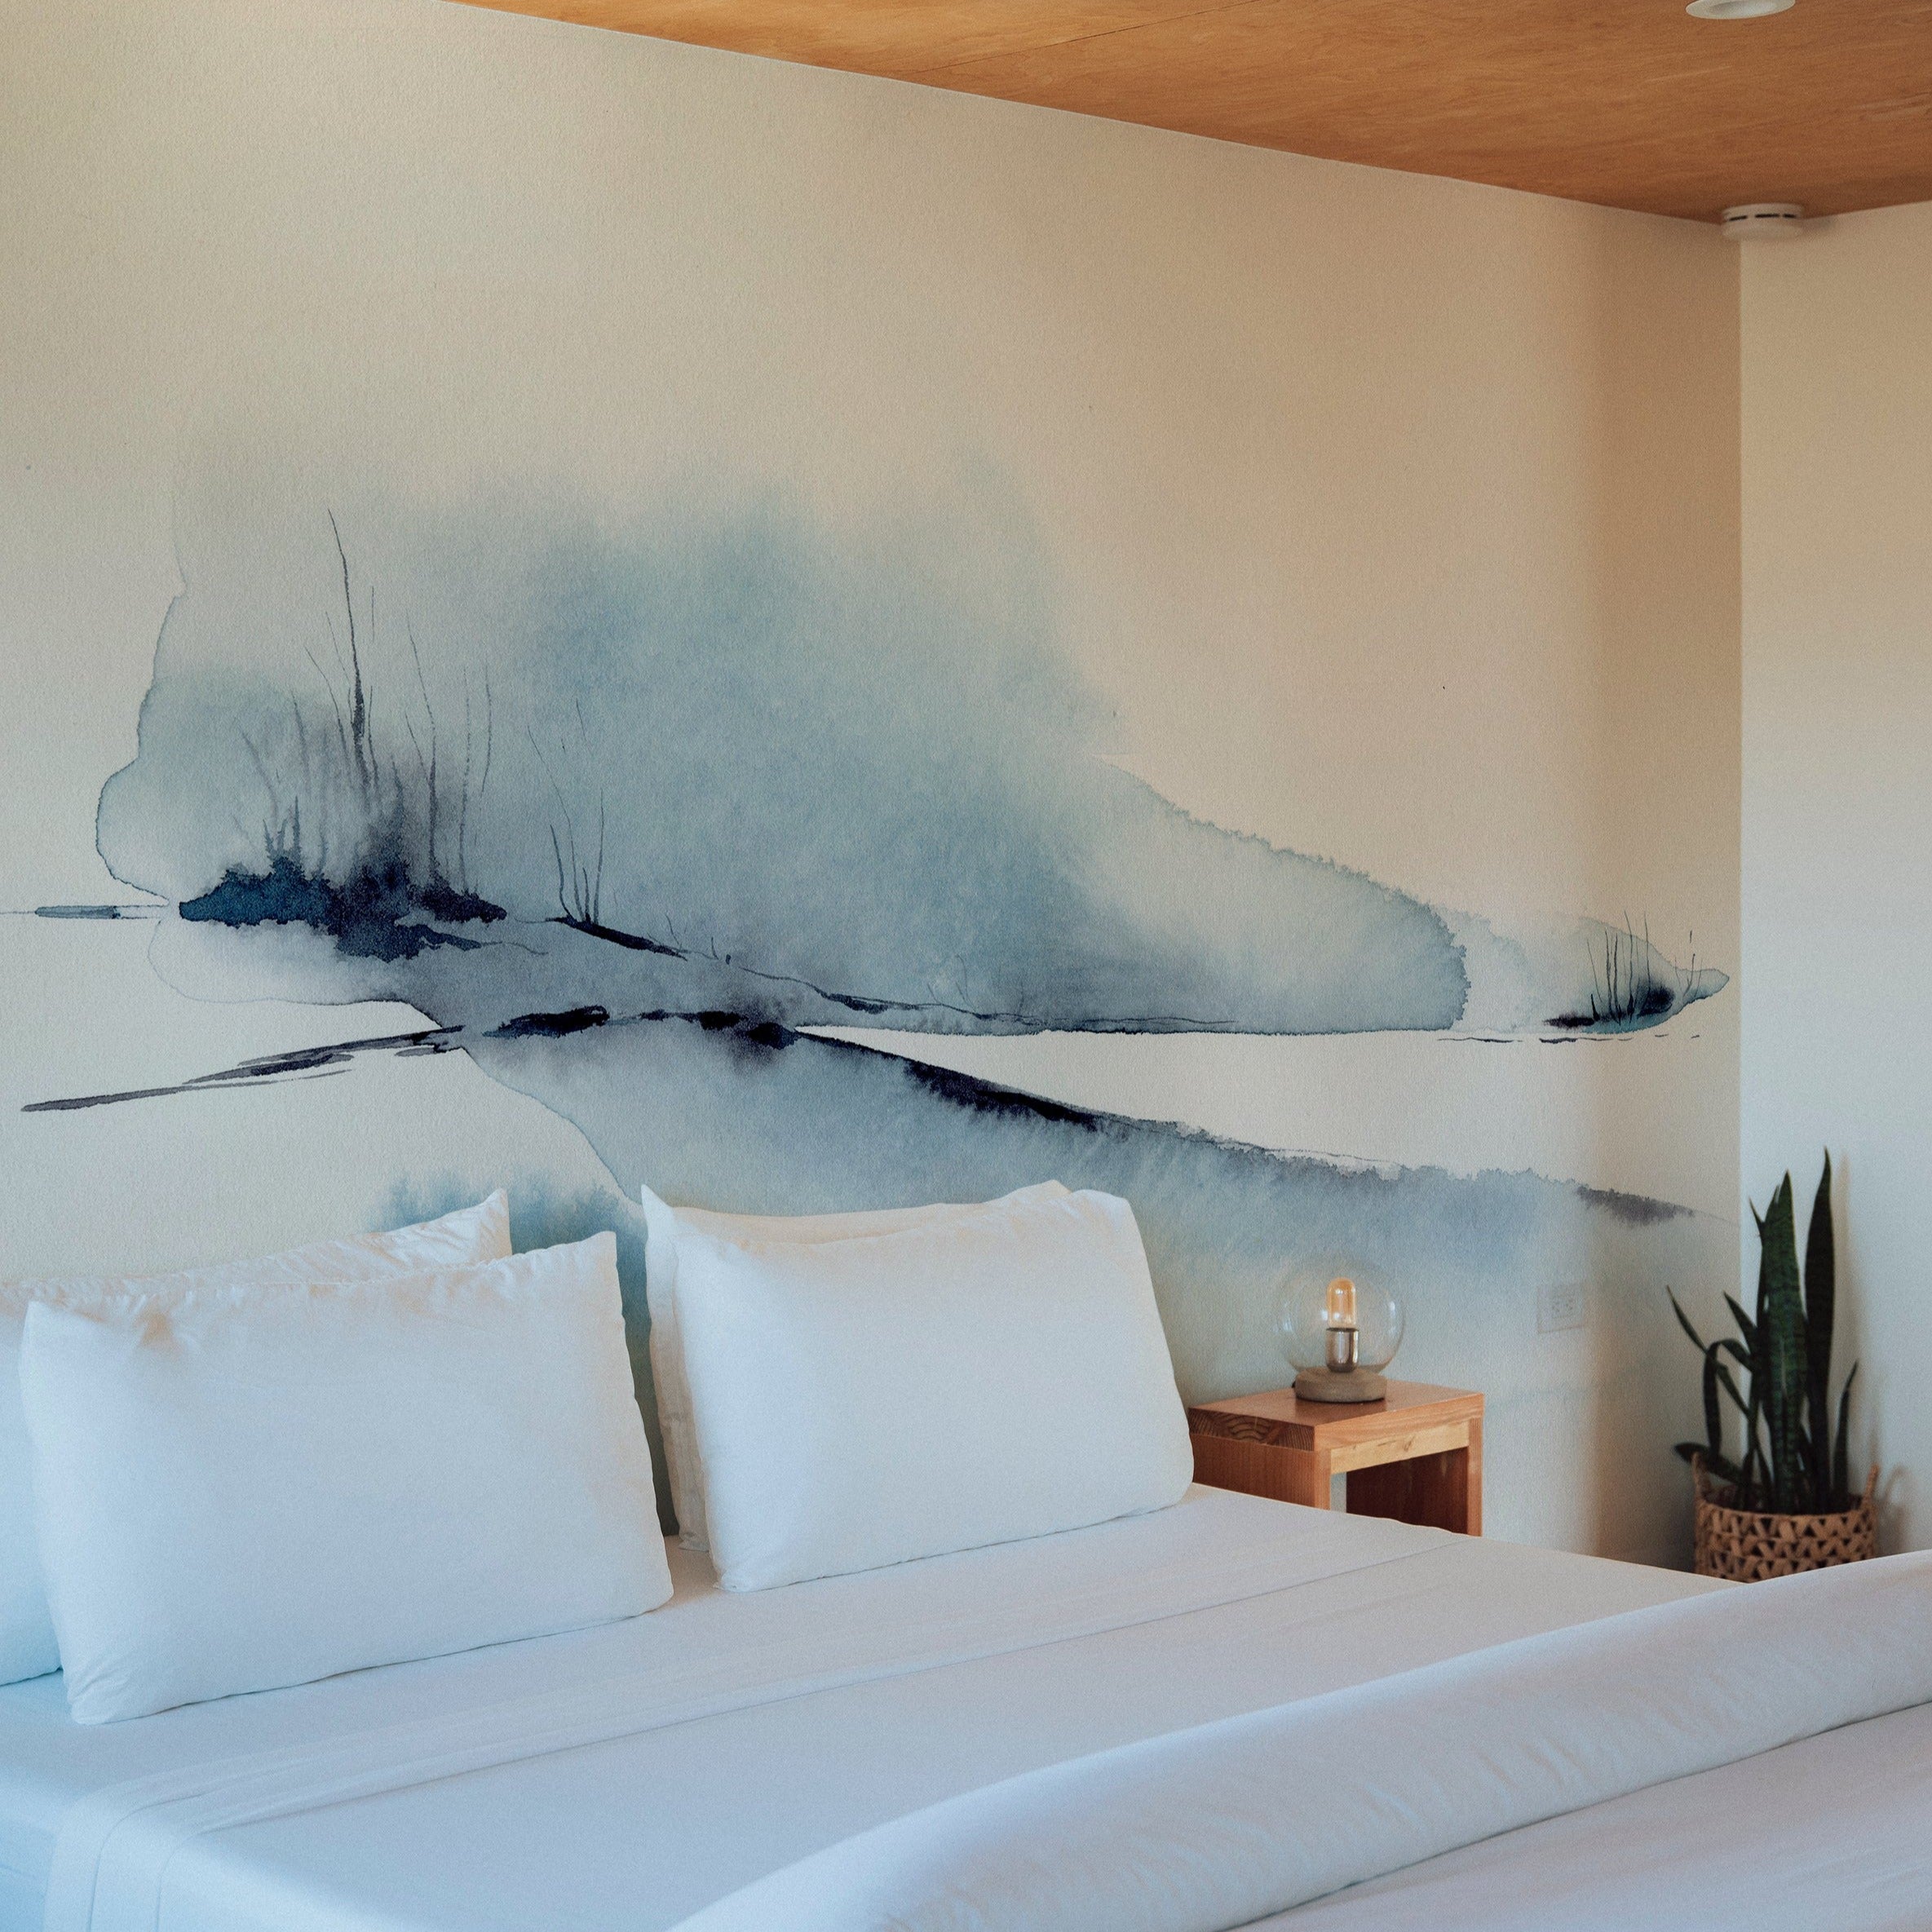 A serene bedroom setup with the "Atmospheric Sky" wall mural painting an ethereal watercolor landscape behind the bed. The mural's soothing blues and detailed brush strokes create a peaceful ambiance, complemented by simple white bedding and minimalistic decor.